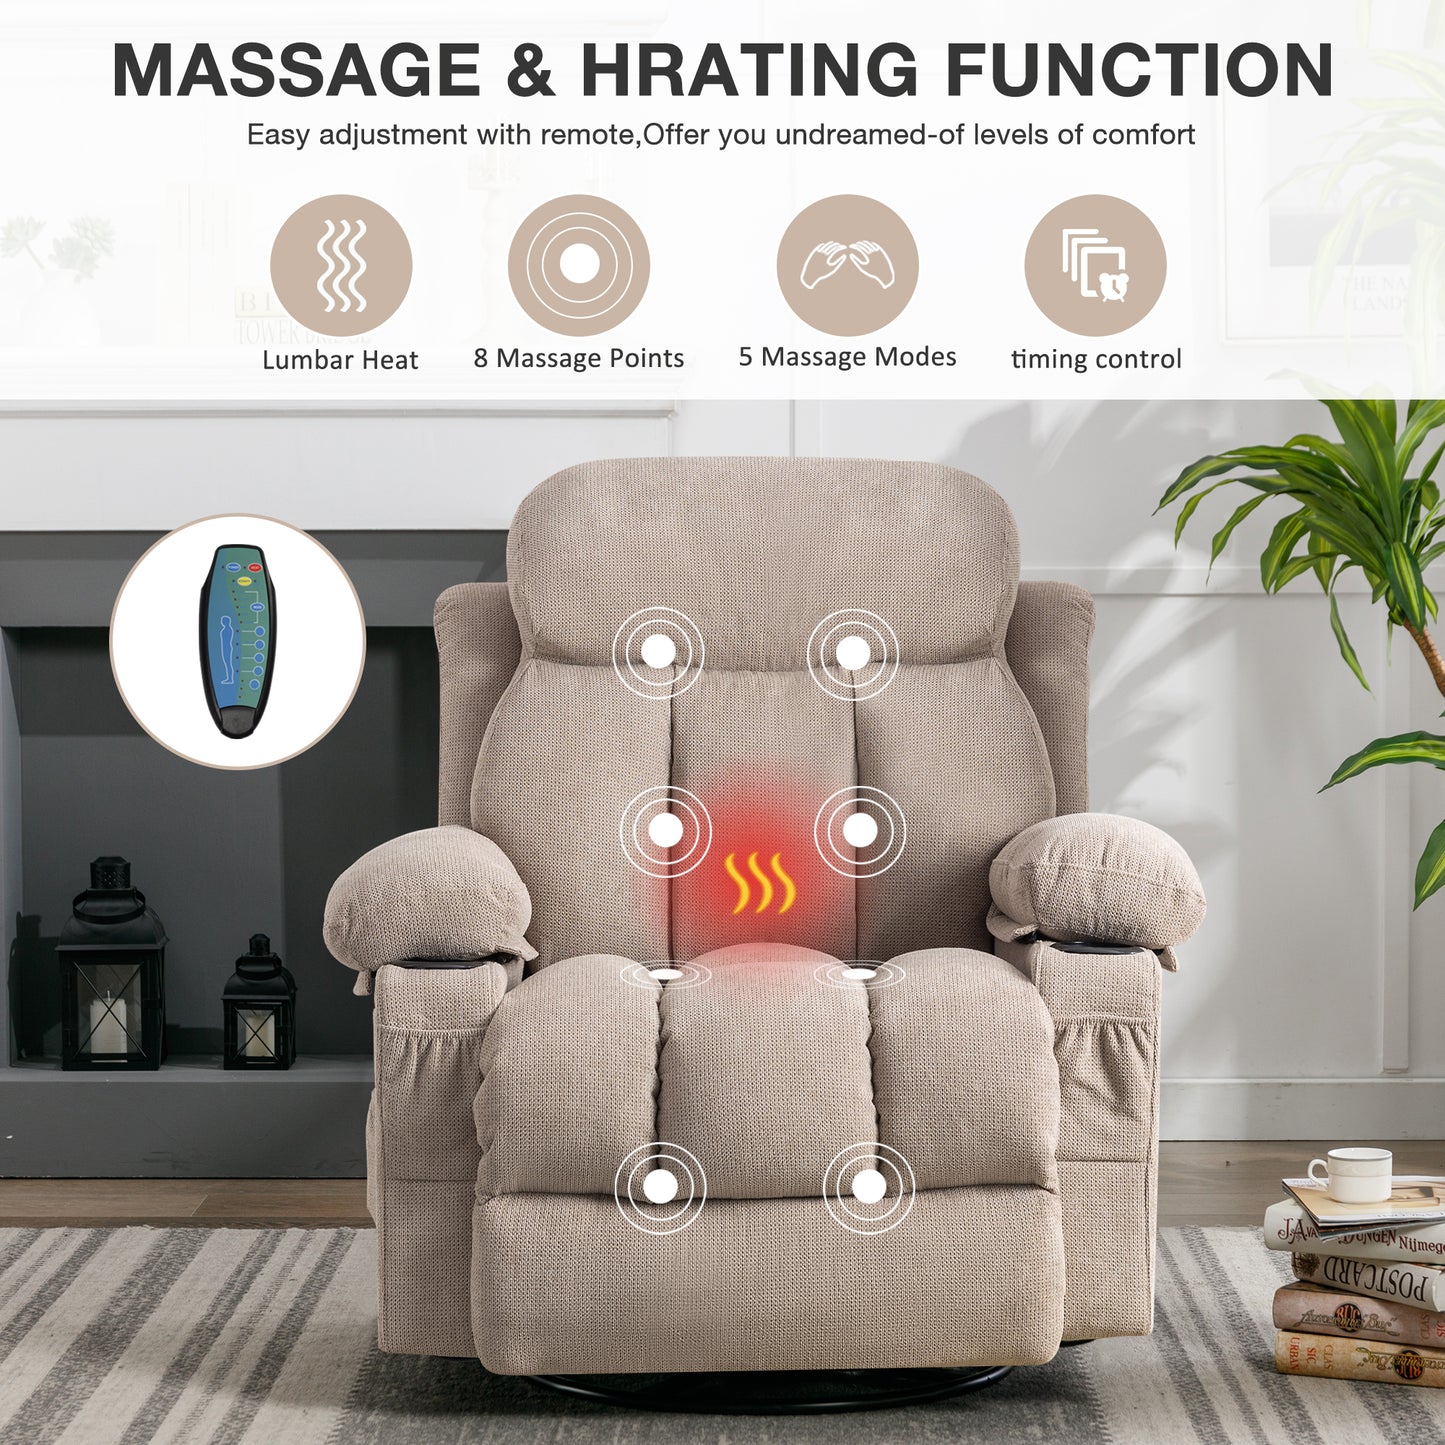 HSUNNS Recliner Chair with Heat and Massage Function, Swivel Rocker Sofa with USB and Cup Holders, Massage Chair for Adults, Heavy Duty Single Leisure Sofa Seat for Living Room Nursery, Beige